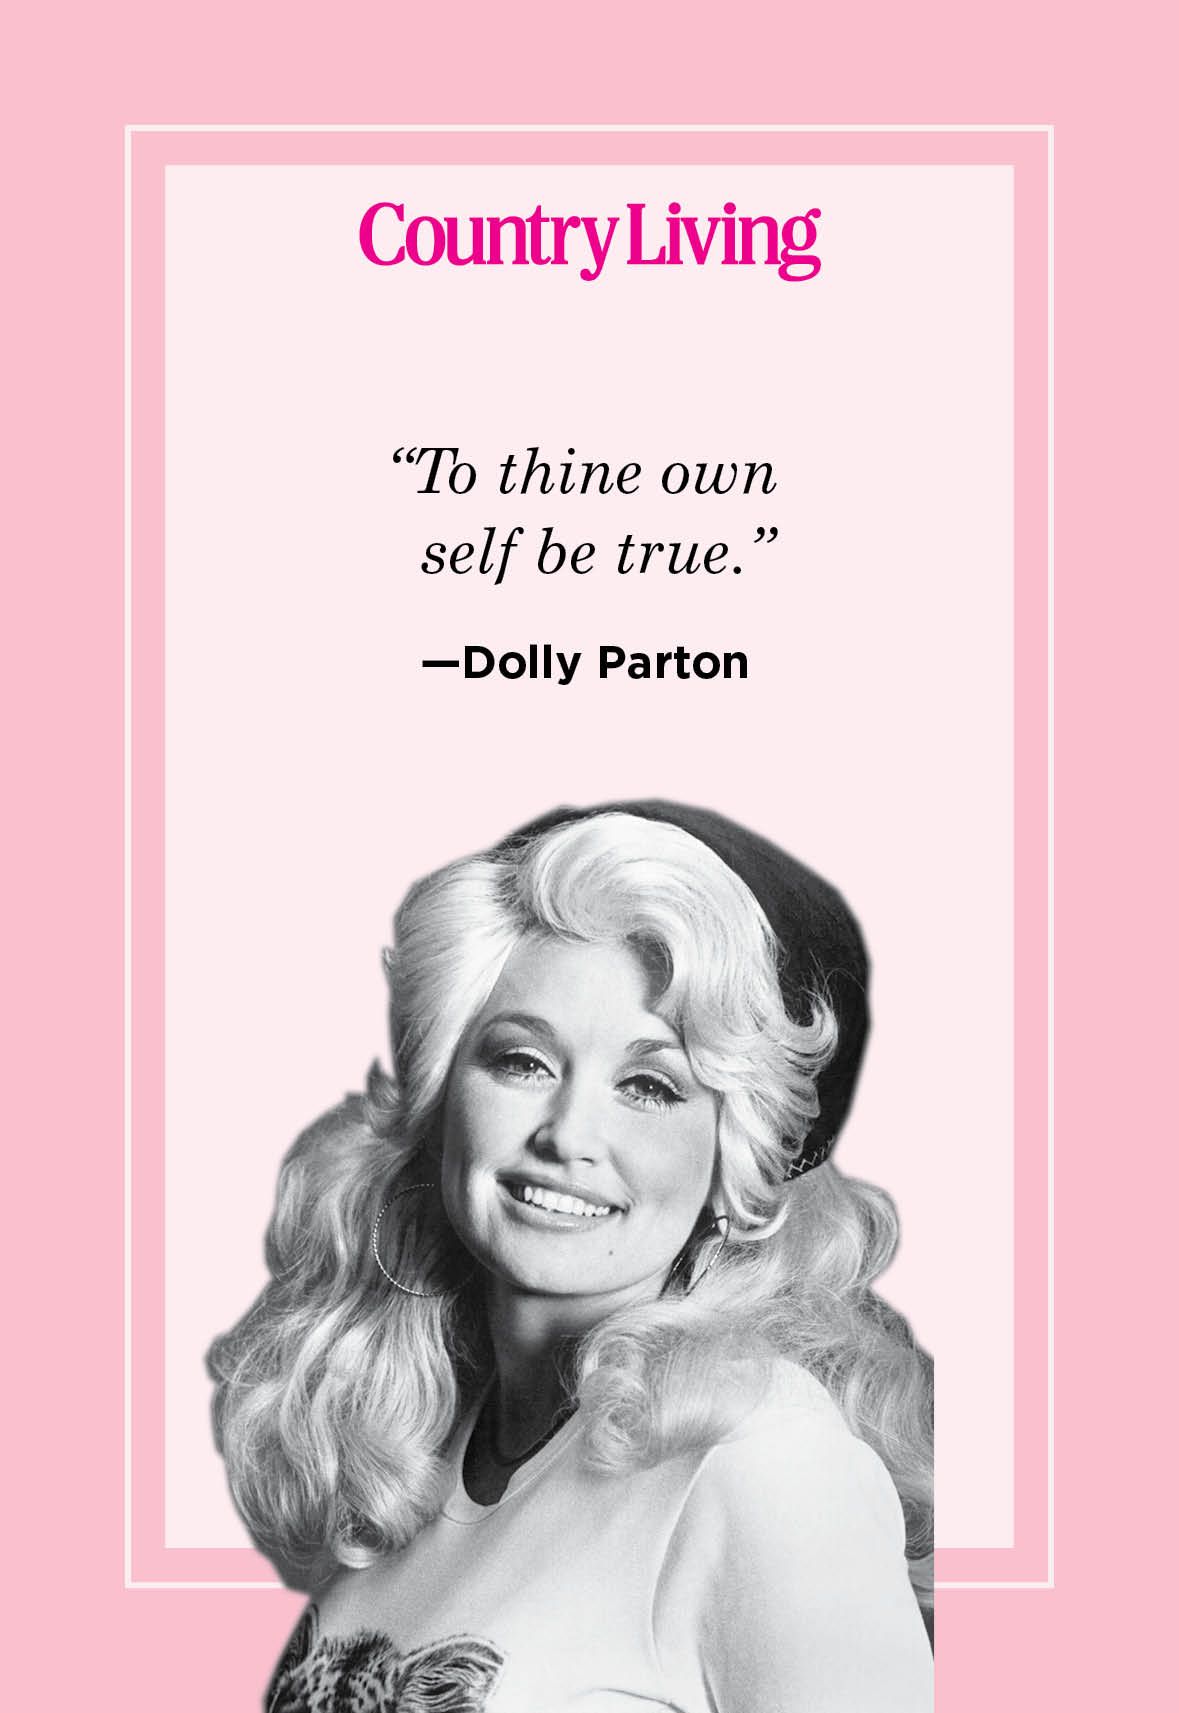 Famous Dolly Parton Quotes for 2023  Dolly Parton Life Advice